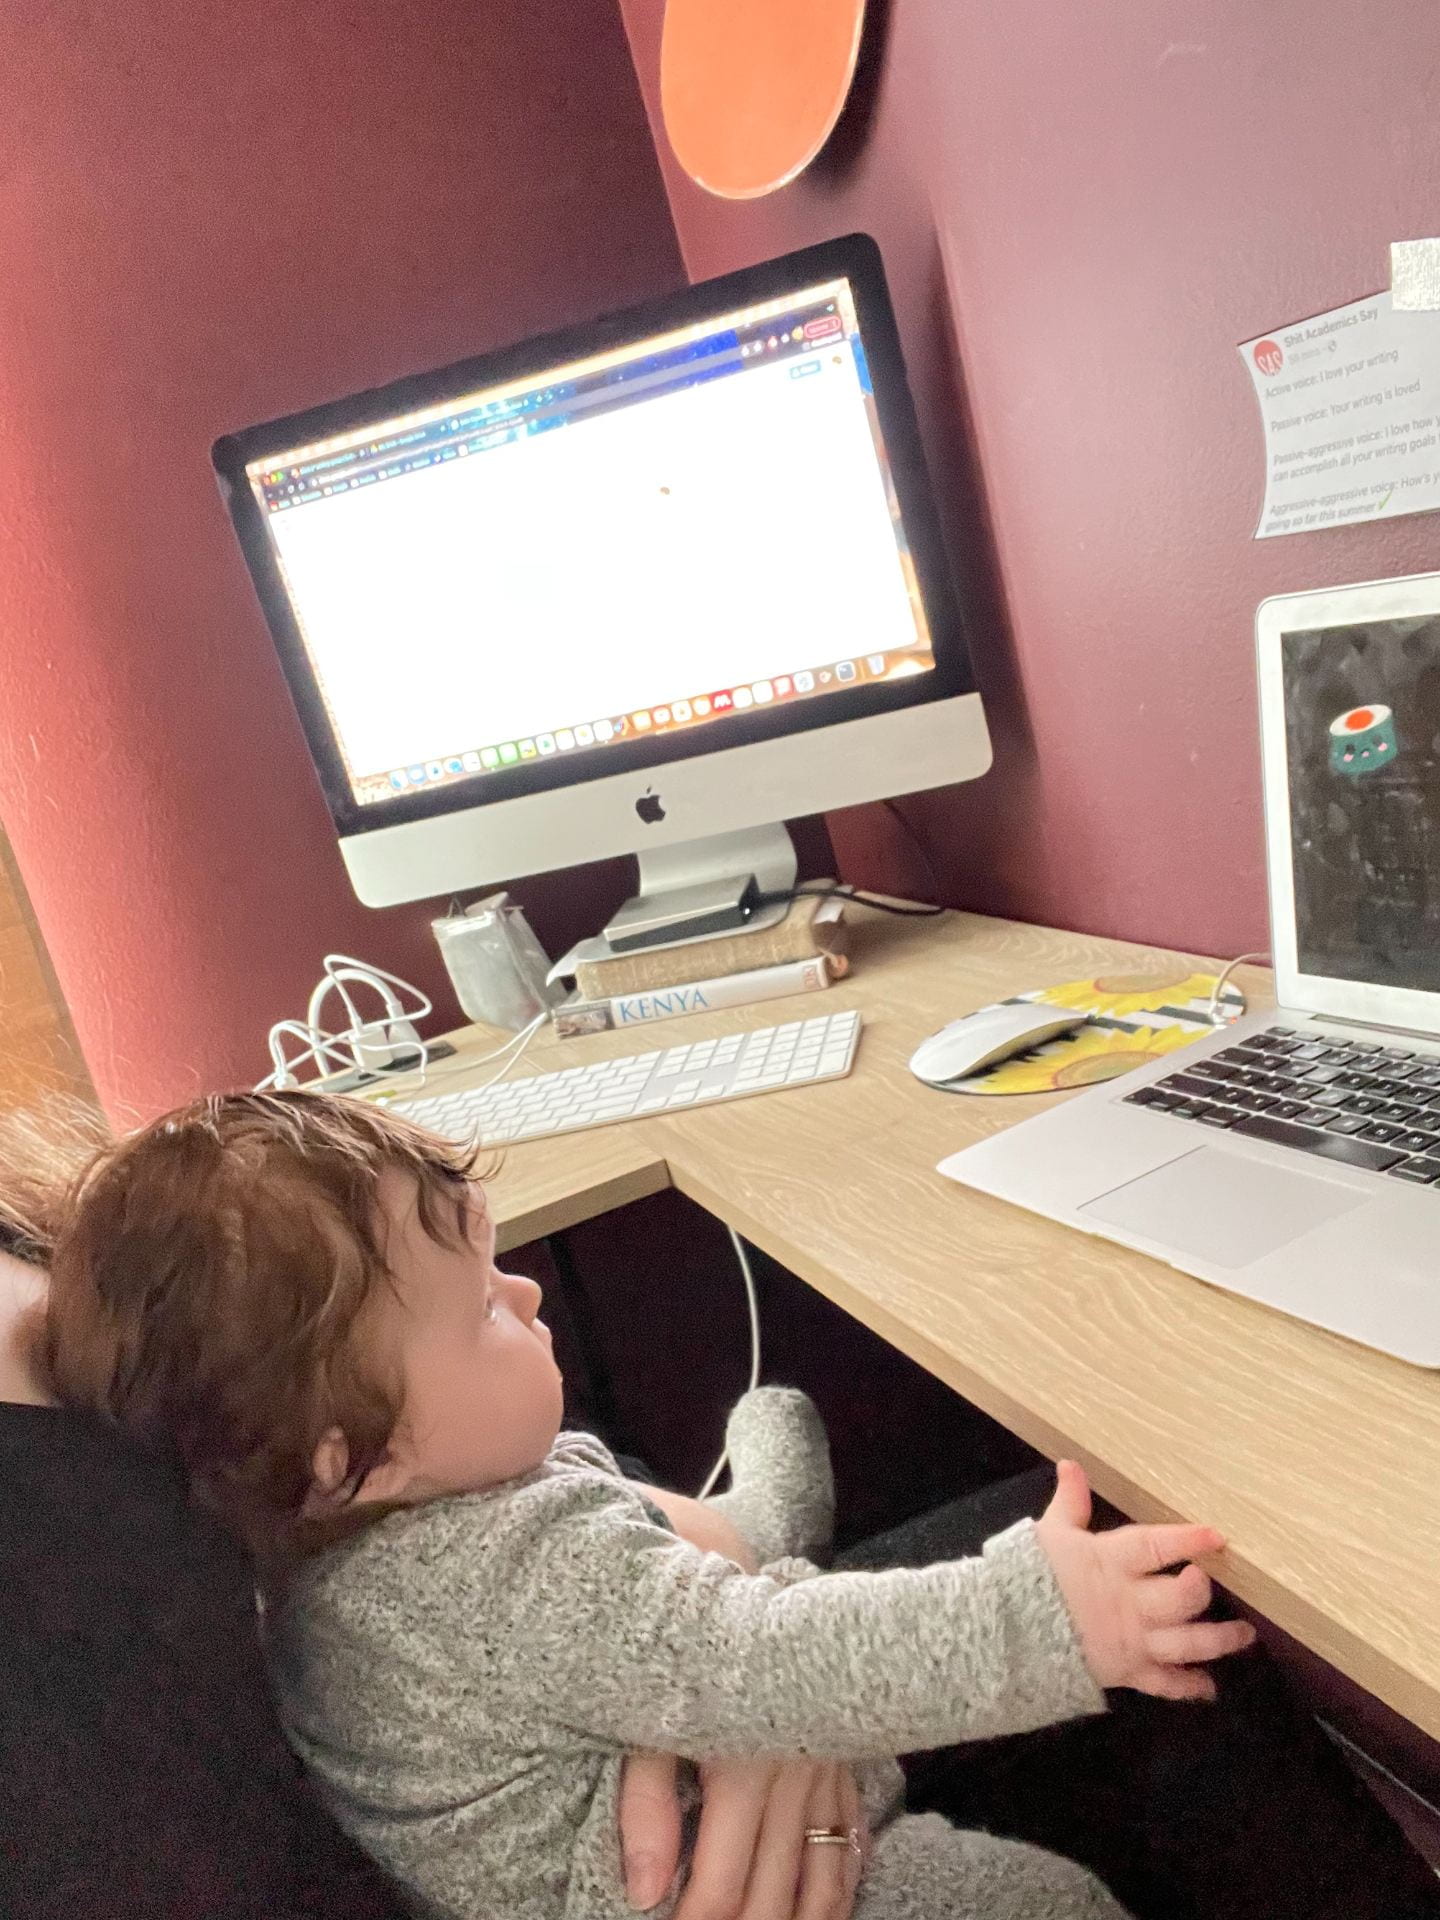 A four month old infant stares at a laptop playing a video of dancing cartoon fruit while schoolwork is visible on an iMac on the other half of the desk